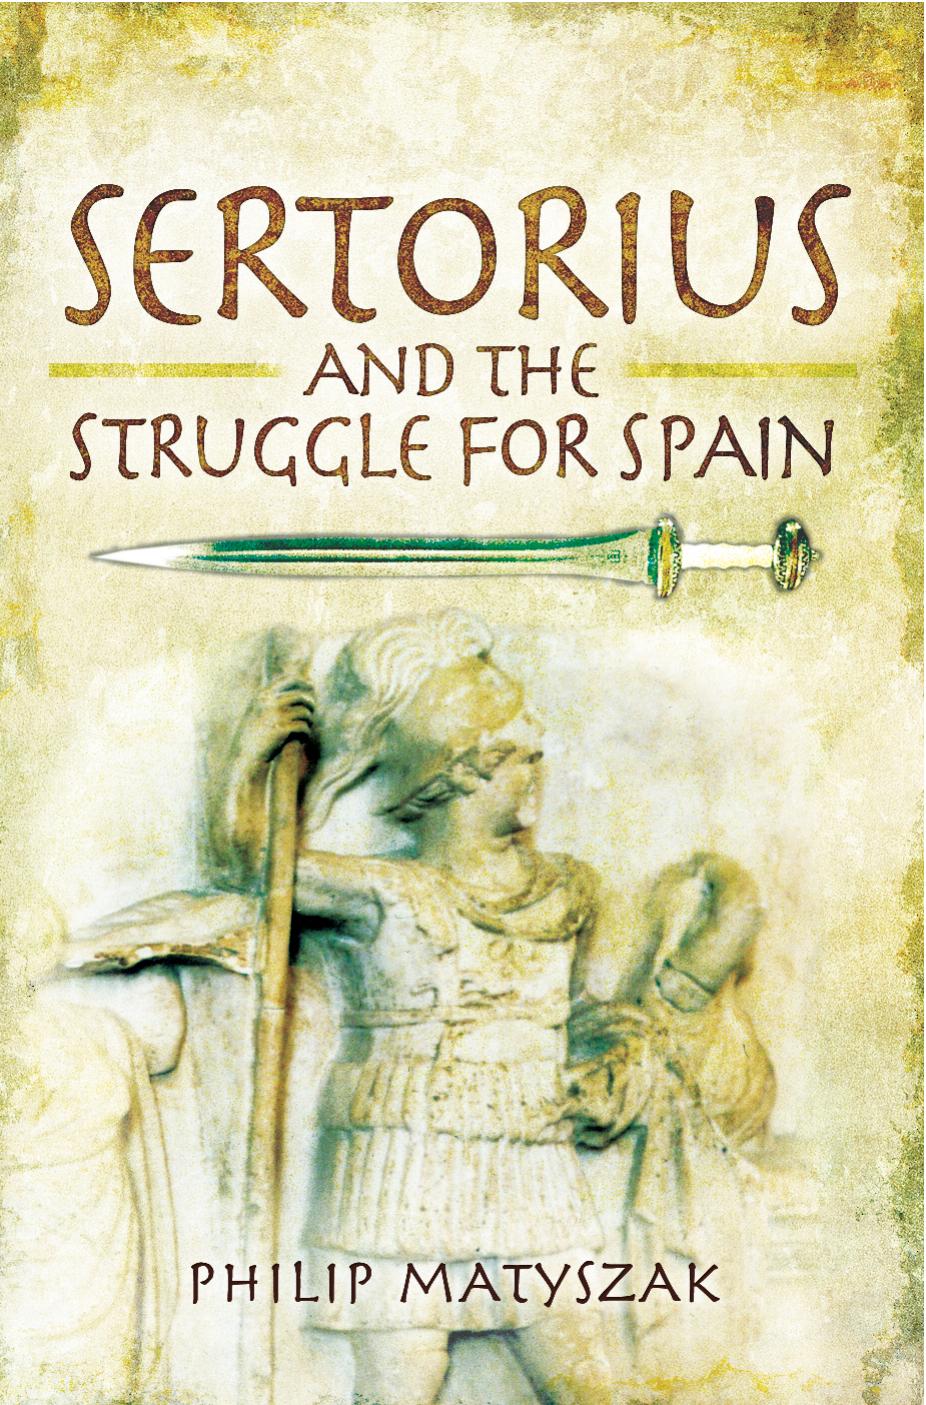 Sertorius and the Struggle for Spain by Philip Matyszak